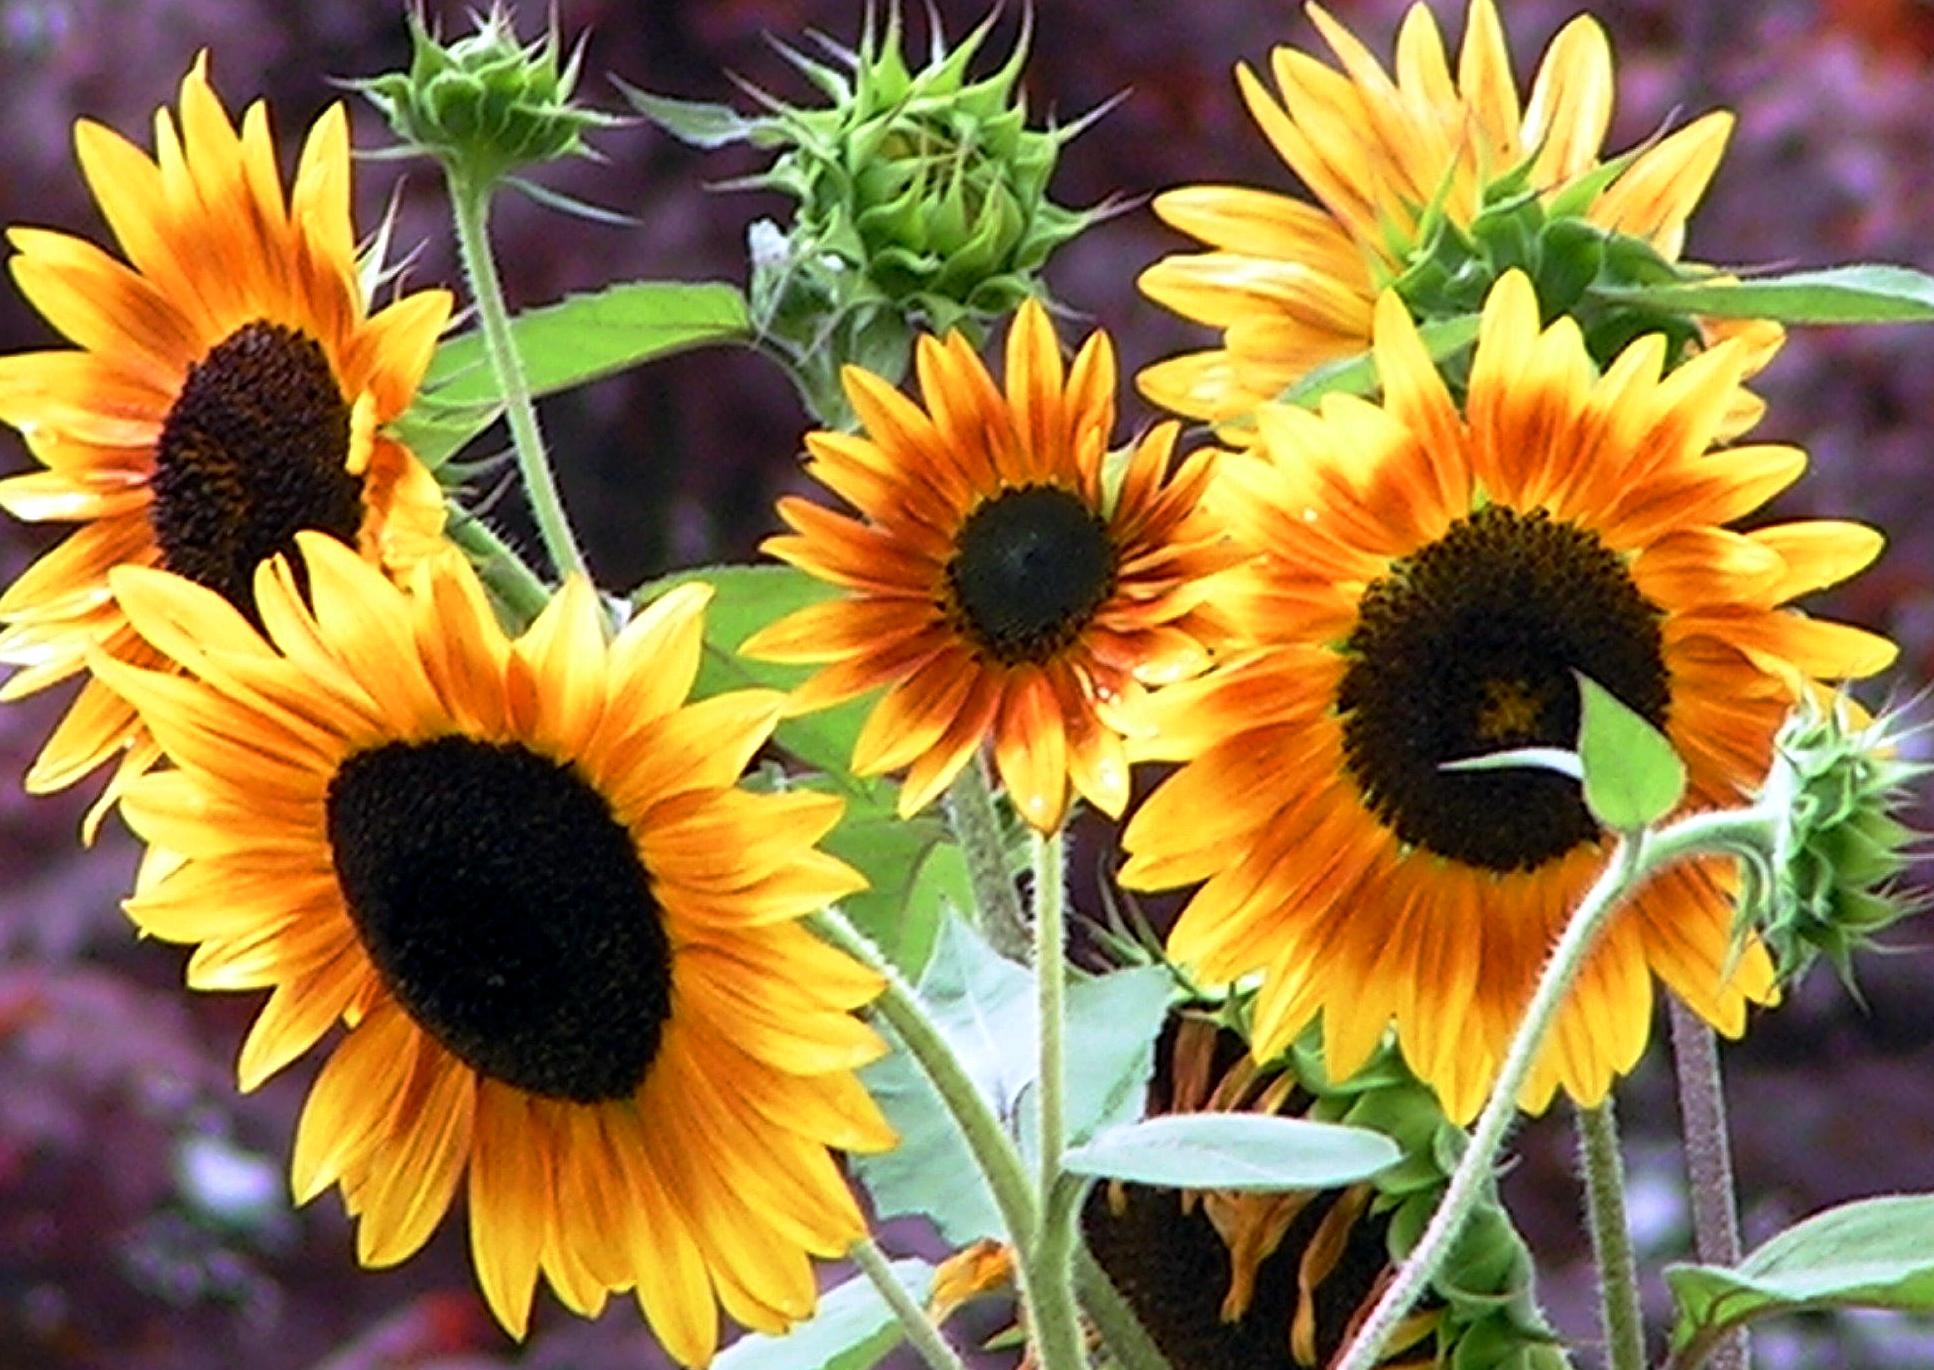 Sunflowers (user submitted)